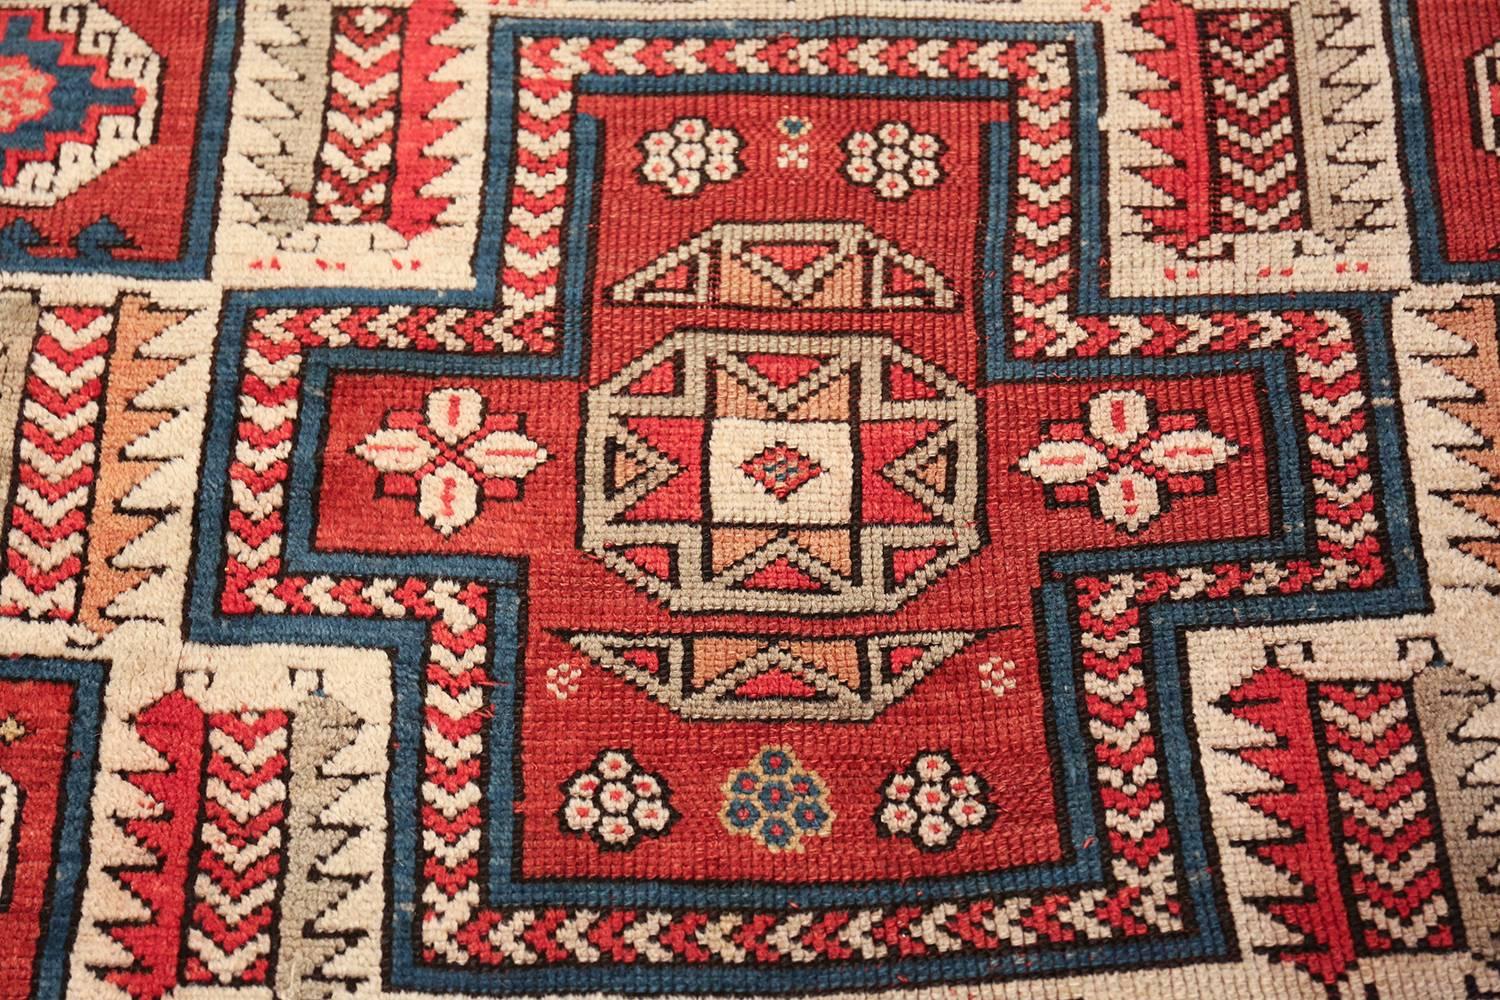 Hand-Knotted Antique Small Size West Anatolian Bergama Rug. Size: 5 ft 6 in x 7 ft 